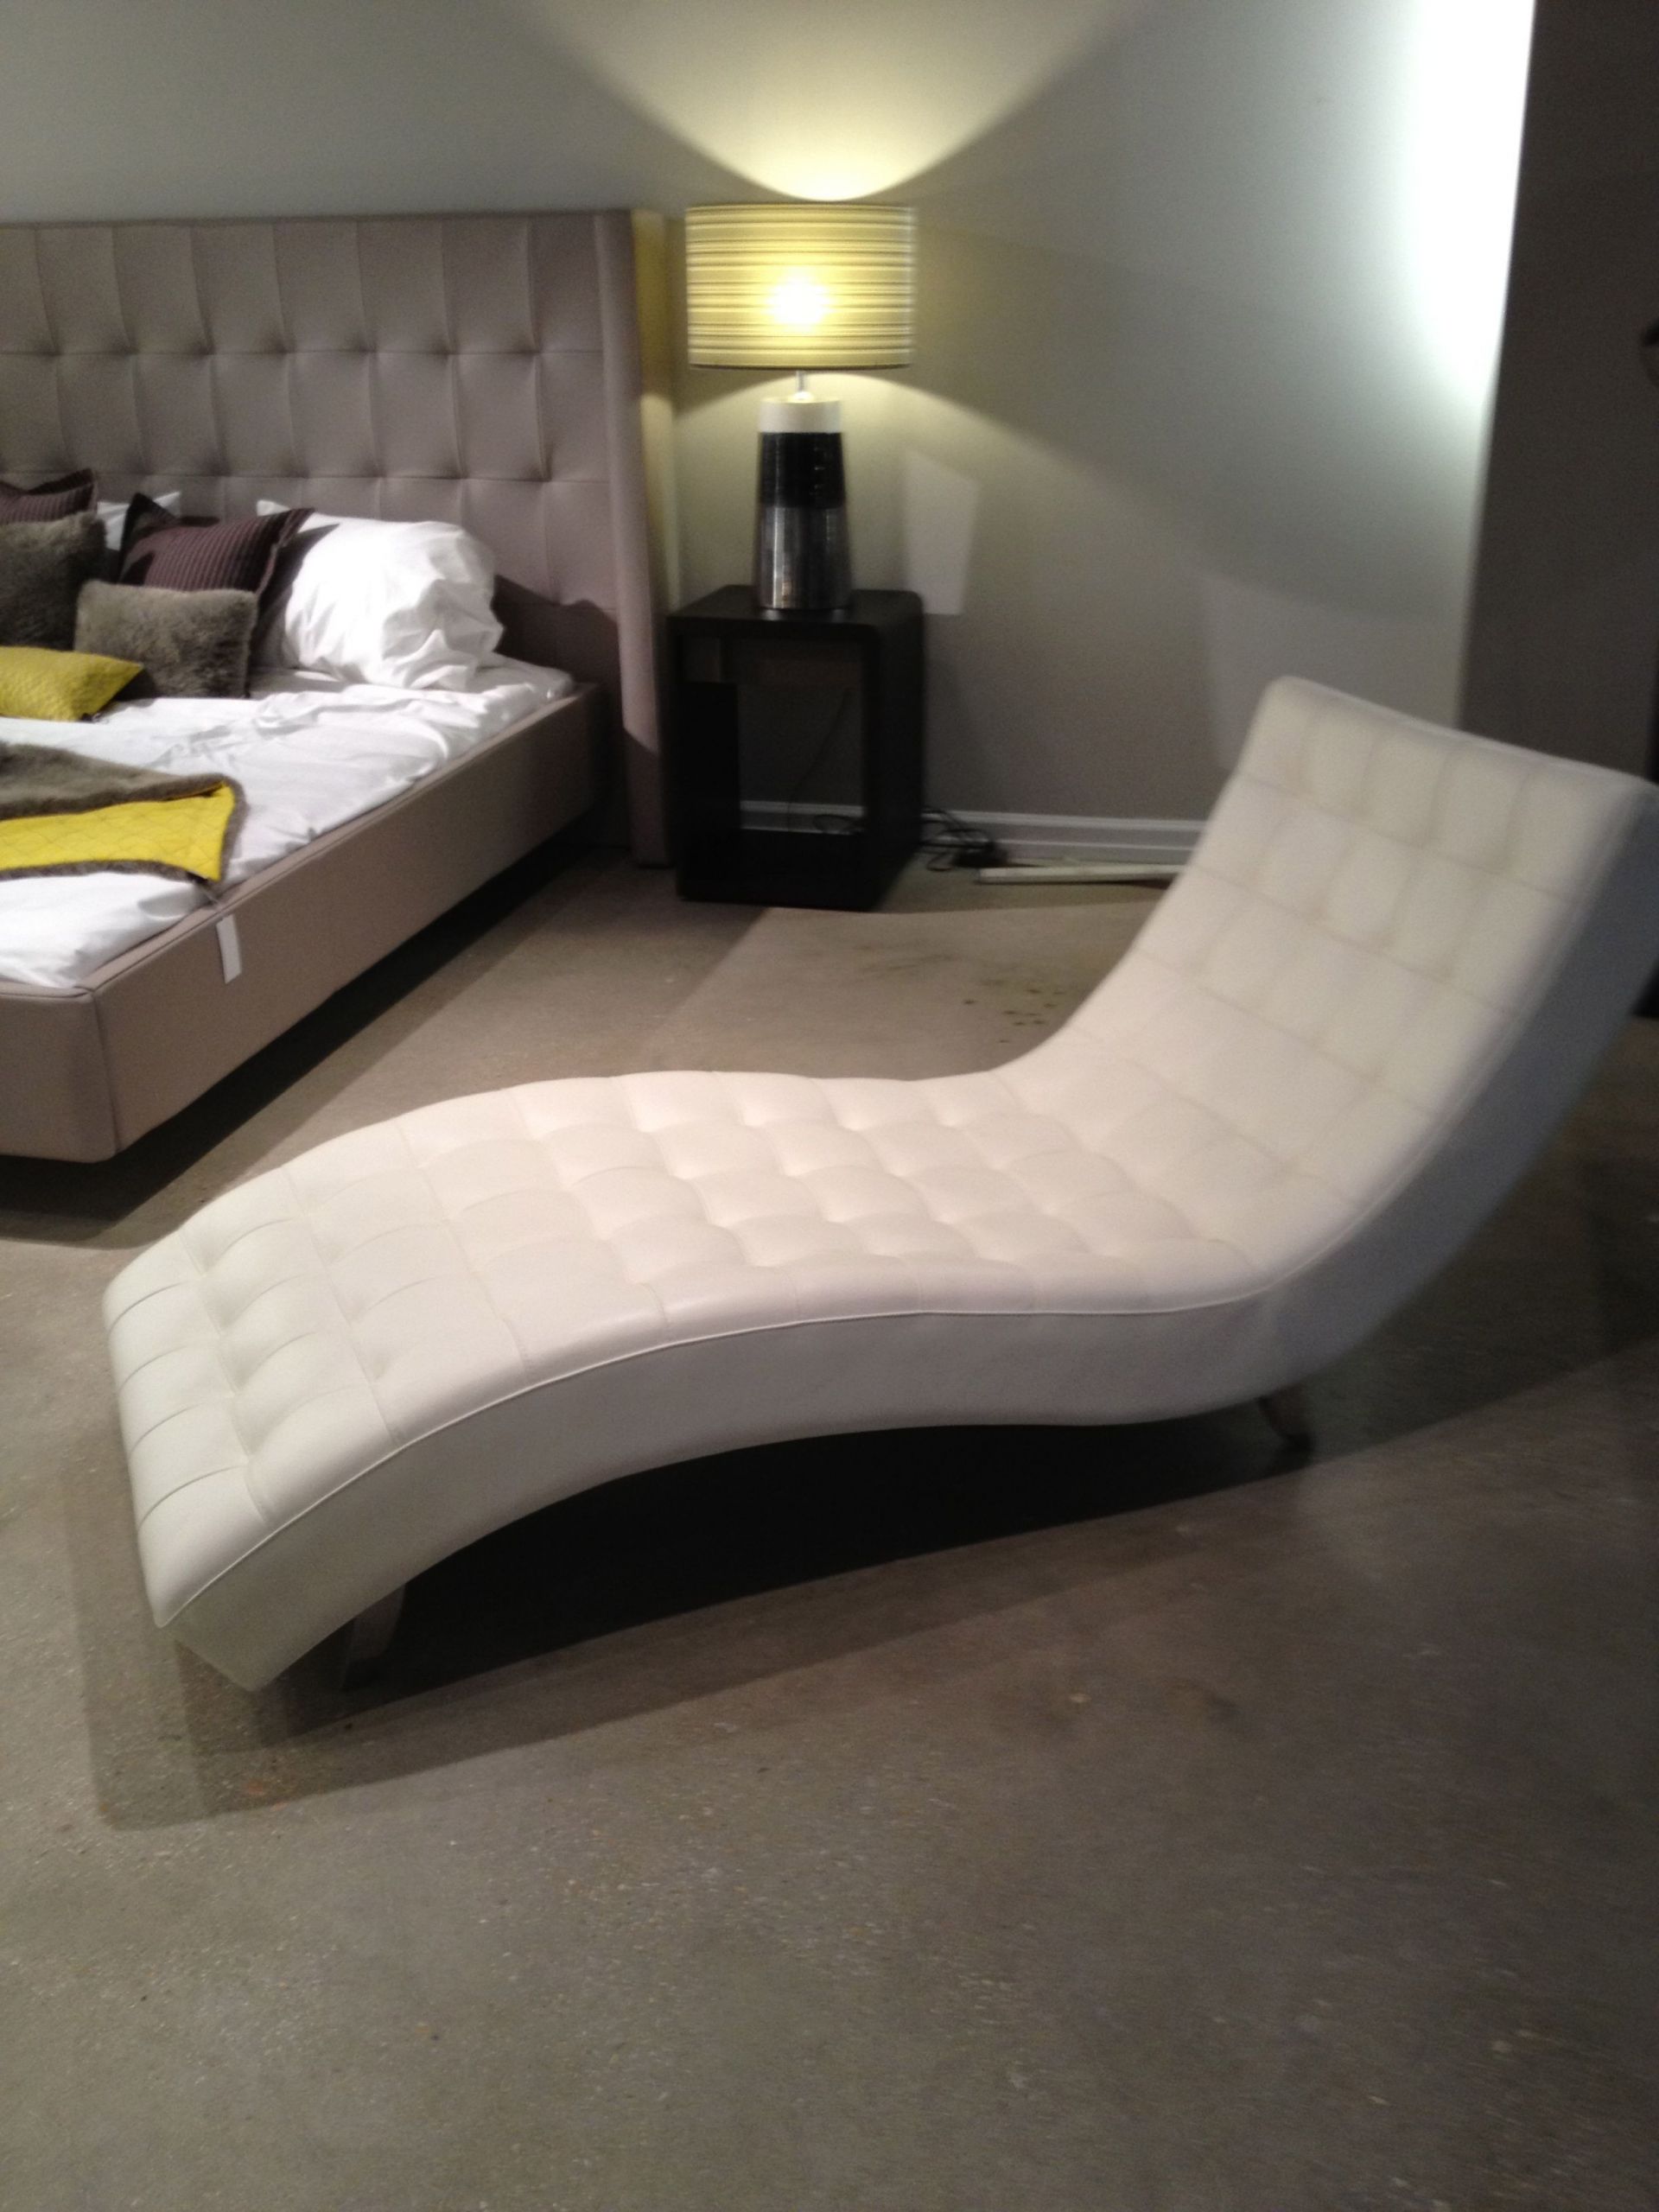 Small Lounge Chairs For Bedroom
 Chaise Lounge for bedroom